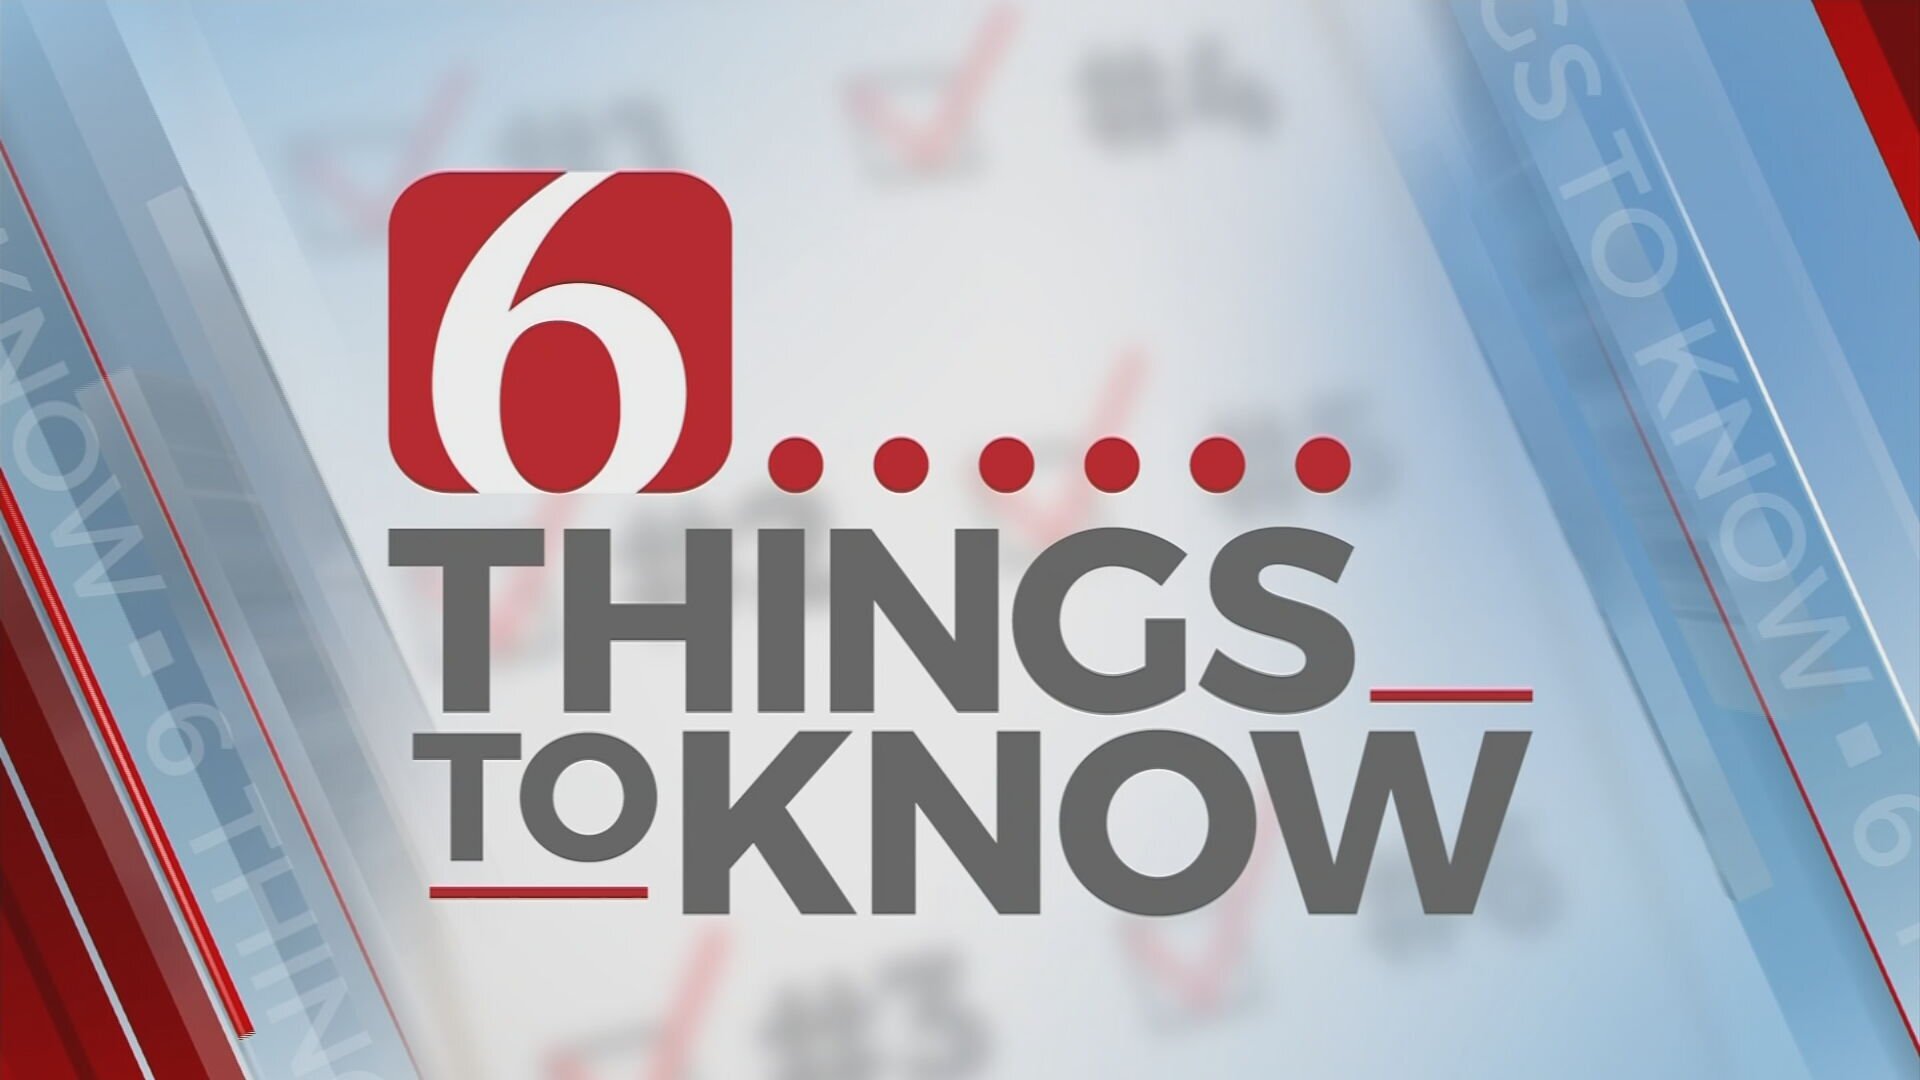 6 Things To Know (Oct 23): Free Food & Free Face Masks 